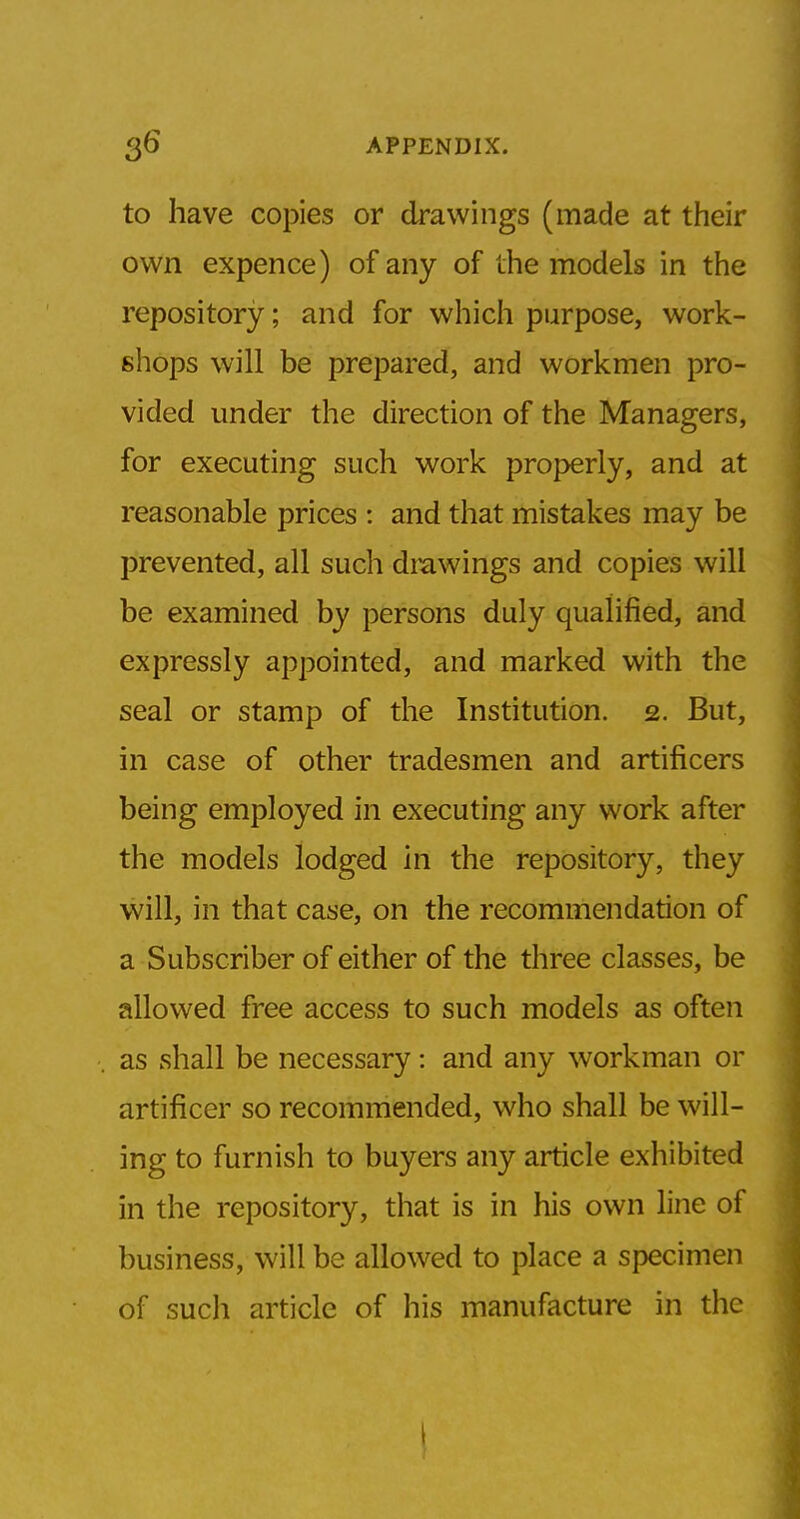 to have copies or drawings (made at their own expence) of any of the models in the repository; and for which purpose, work- shops will be prepared, and workmen pro- vided under the direction of the Managers, for executing such work properly, and at reasonable prices : and that mistakes may be prevented, all such drawings and copies will be examined by persons duly qualified, and expressly appointed, and marked with the seal or stamp of the Institution. 2. But, in case of other tradesmen and artificers being employed in executing any work after the models lodged in the repository, they will, in that case, on the recommendation of a Subscriber of either of the three classes, be allowed free access to such models as often as shall be necessary: and any workman or artificer so recommended, who shall be will- ing to furnish to buyers any article exhibited in the repository, that is in his own line of business, will be allowed to place a specimen of such article of his manufacture in the !